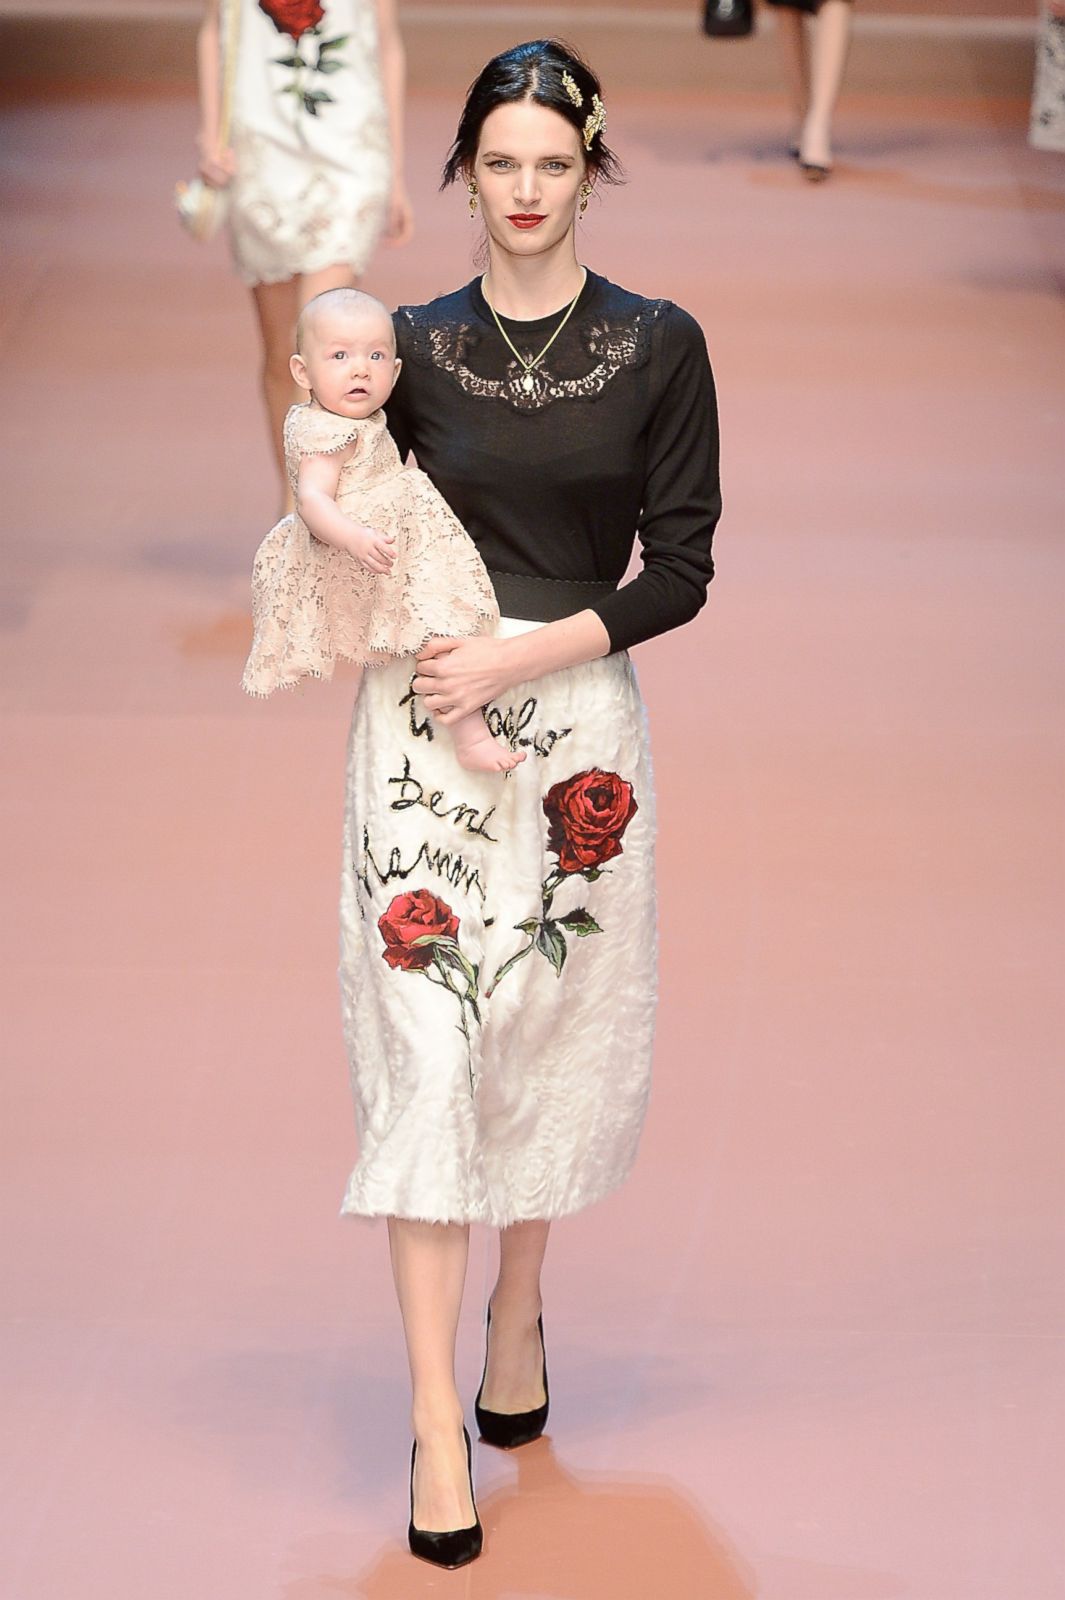 Dolce & Gabbana Celebrates Moms with Jaw-Dropping Fashion Picture | Hot